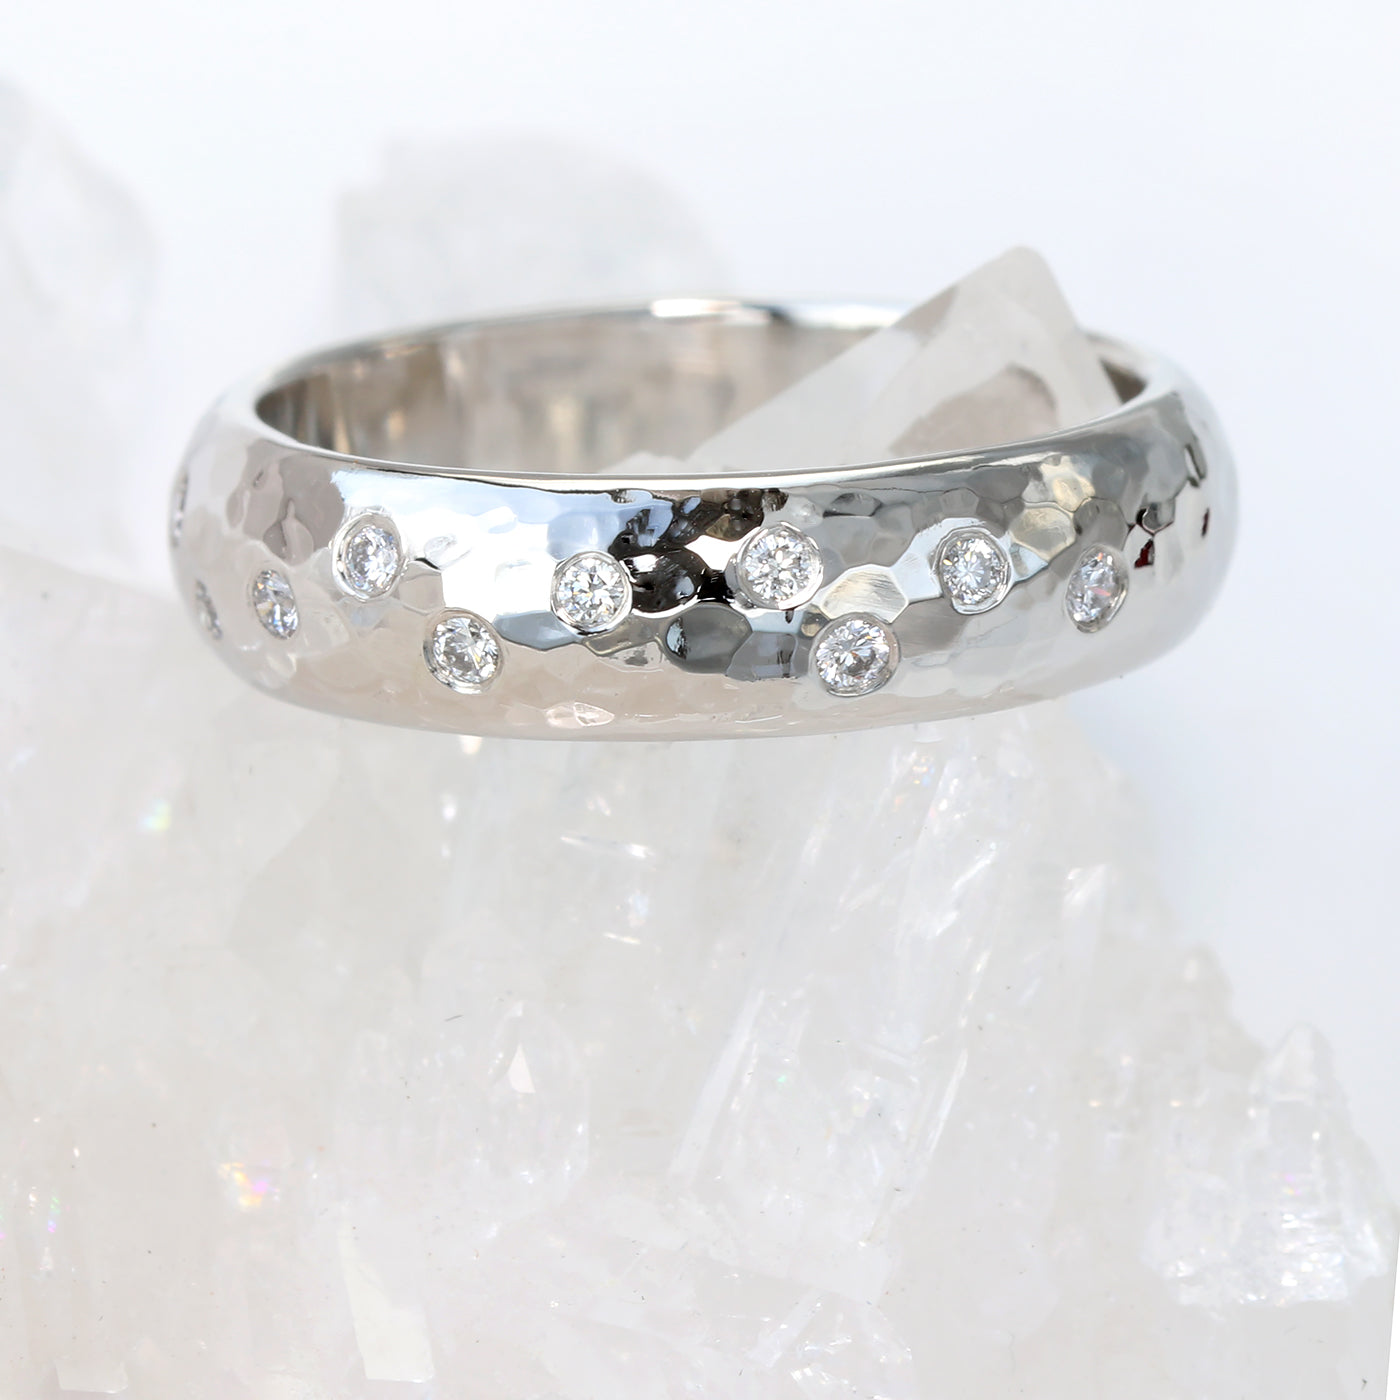 Chunky Hammered Diamond Wedding or Eternity Ring in Platinum - Size M 1/2